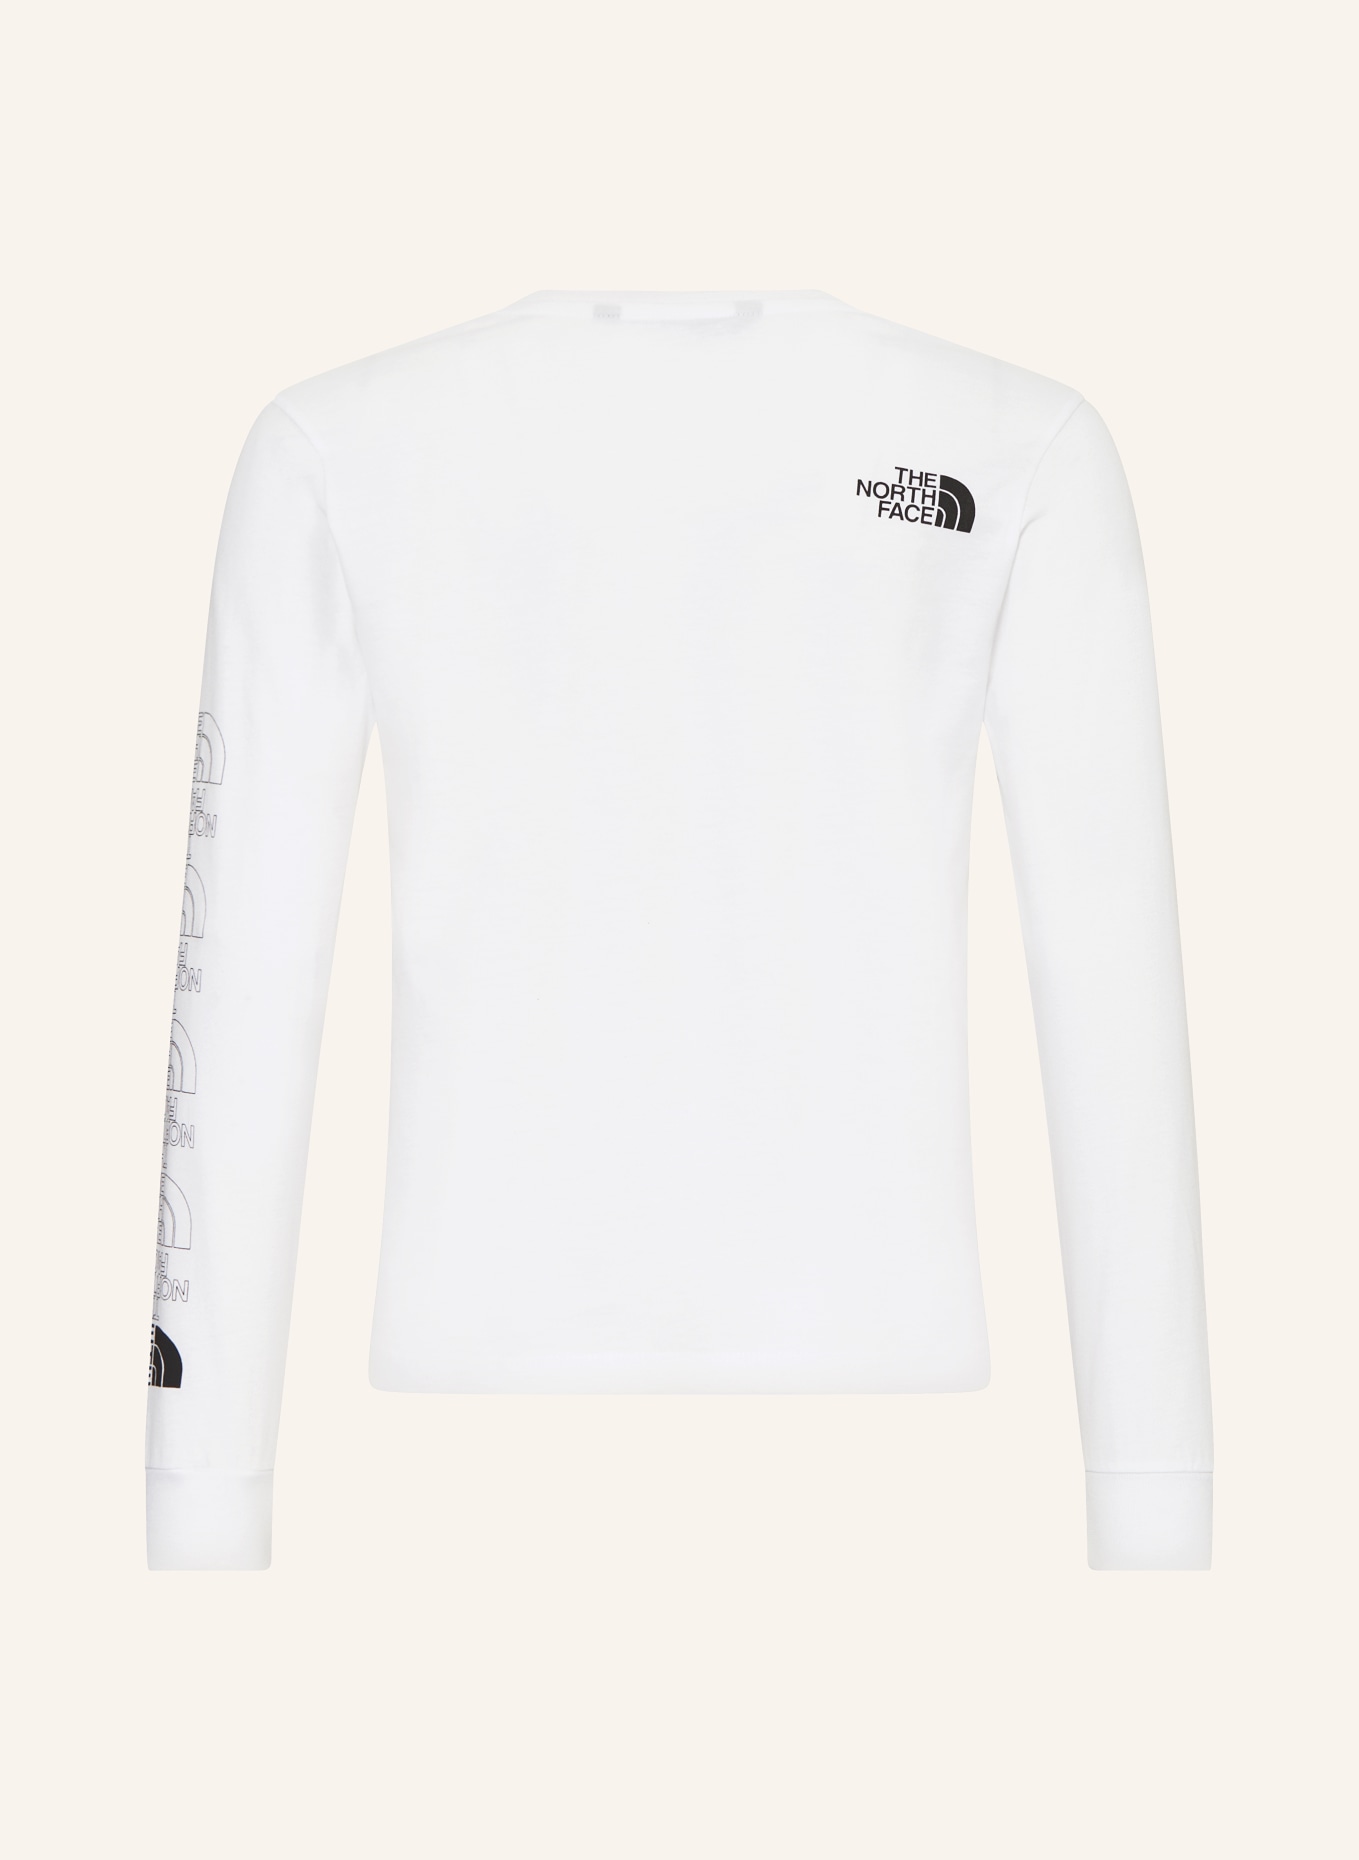 THE NORTH FACE Longsleeve, Farbe: WEISS (Bild 2)